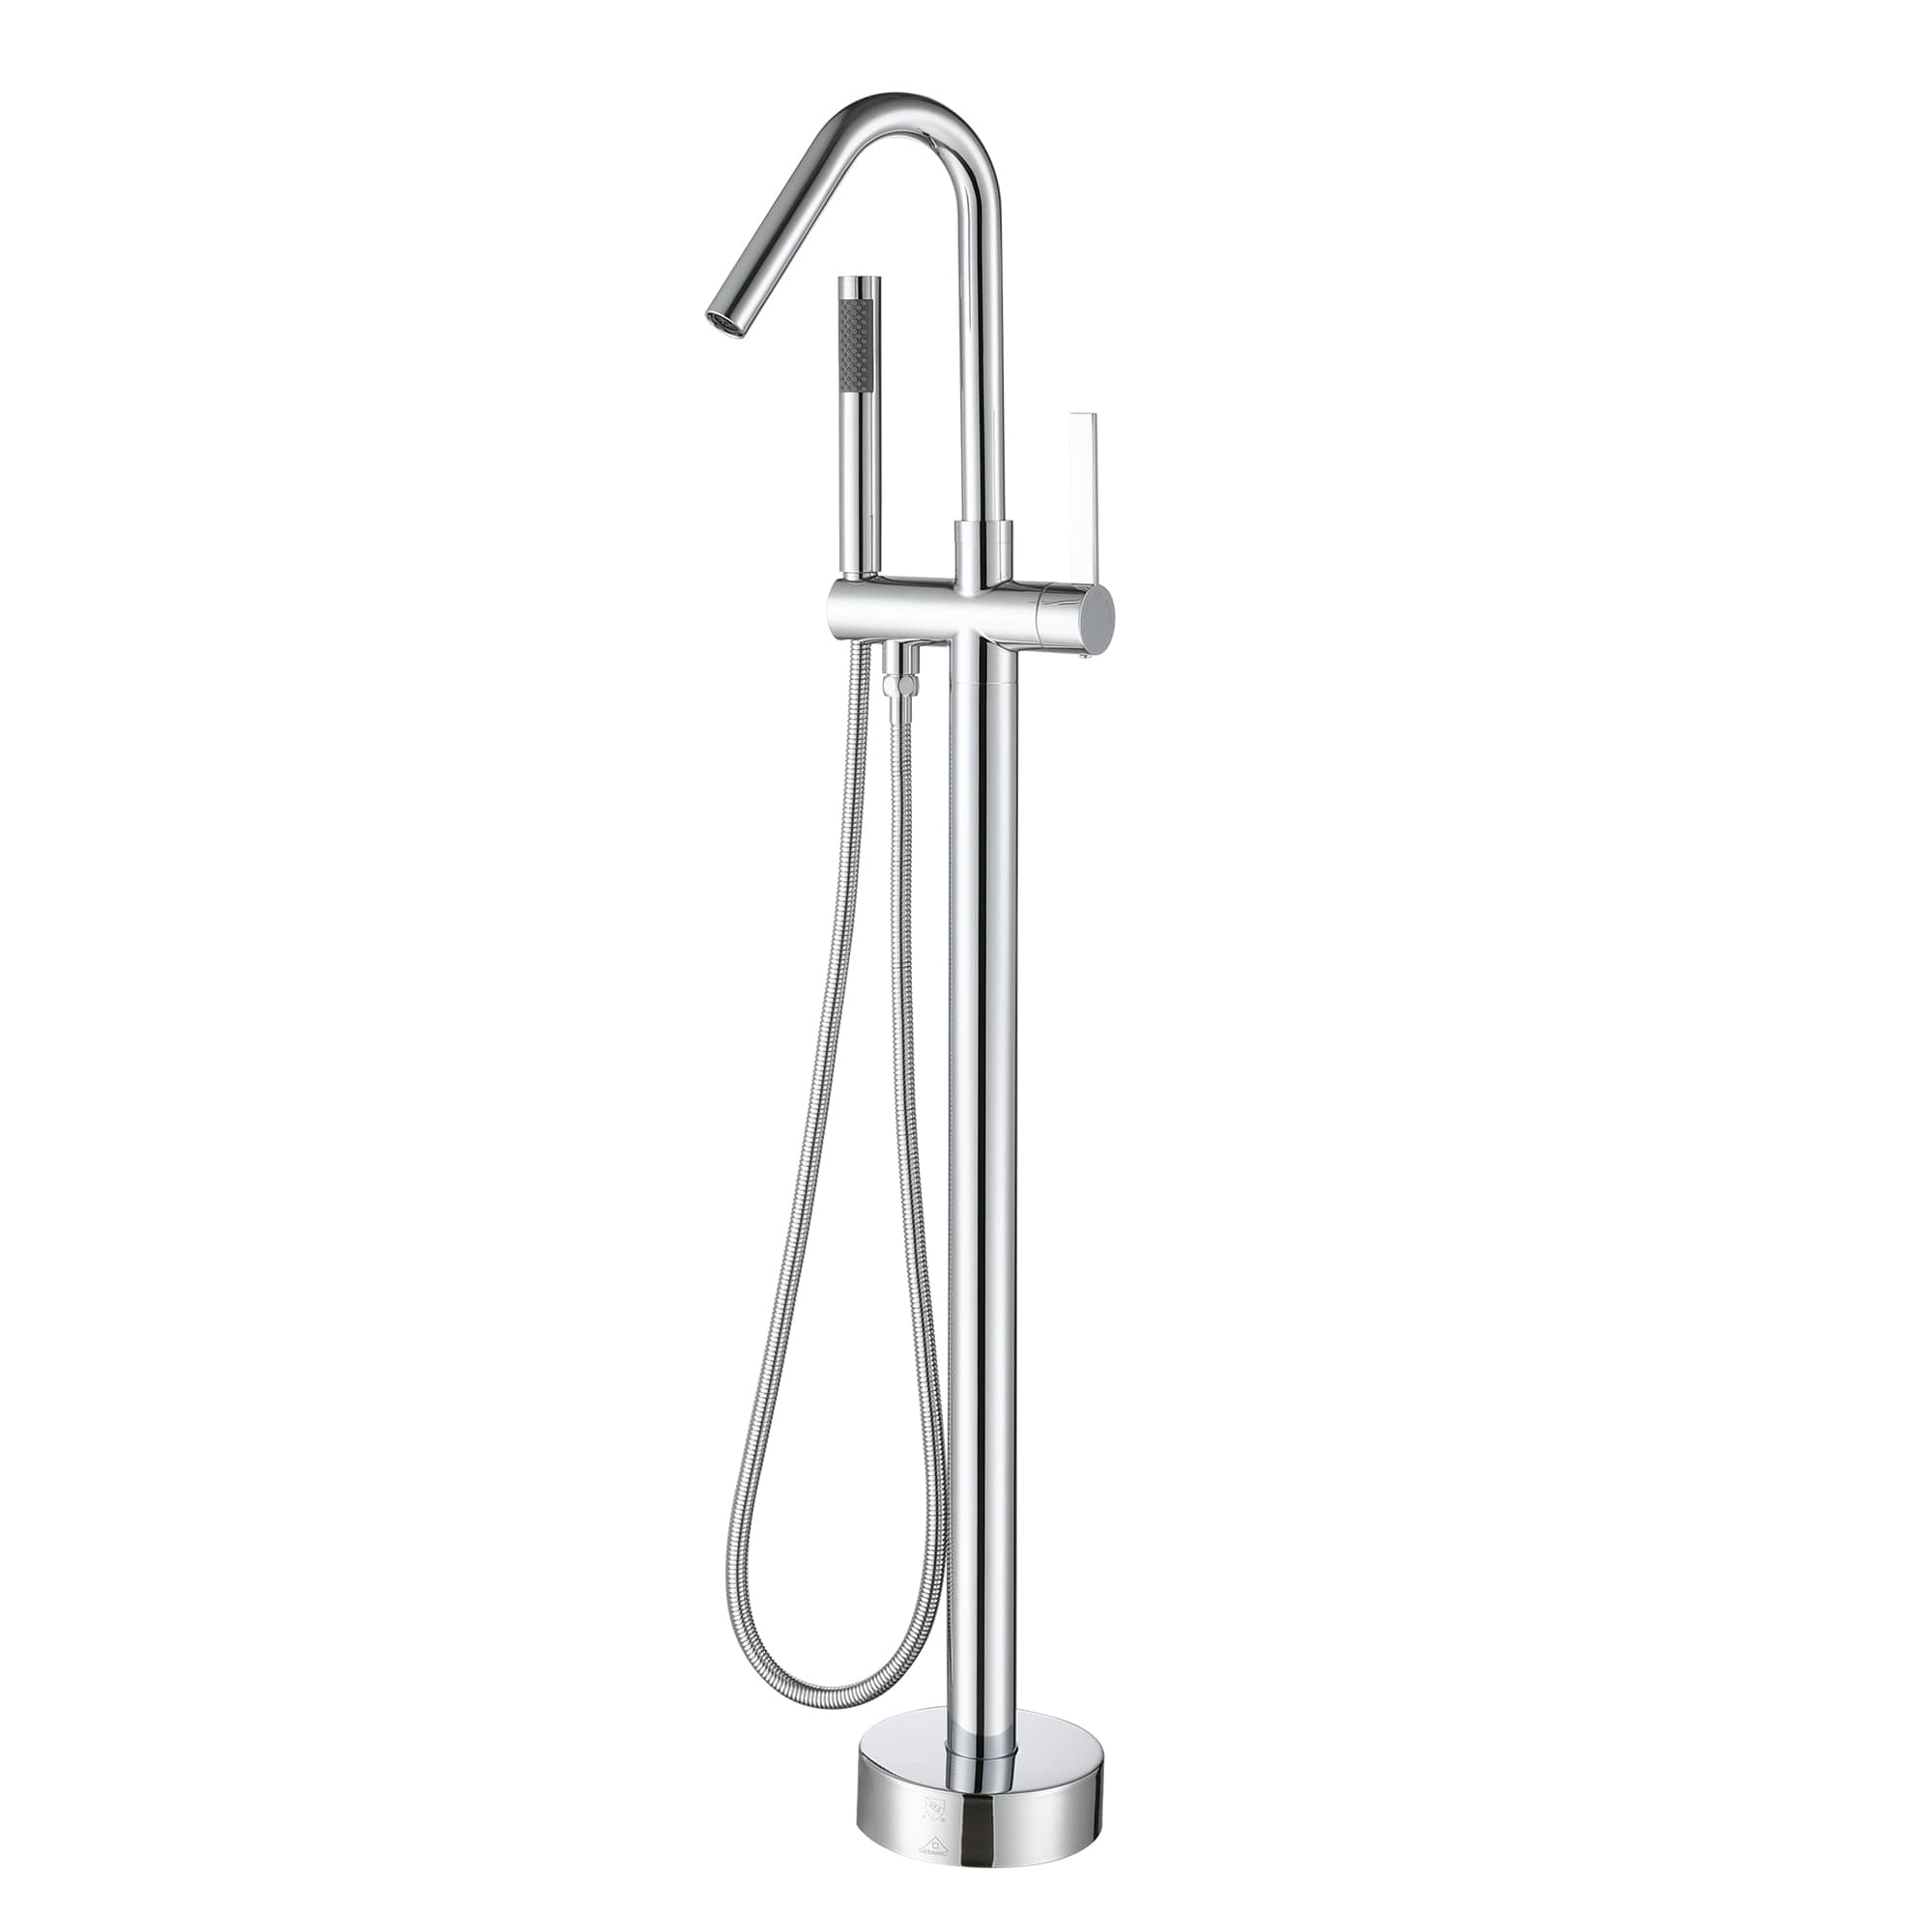 Casainc 1-Handle Freestanding Bathtub Faucet with Hand Shower in Six Colors